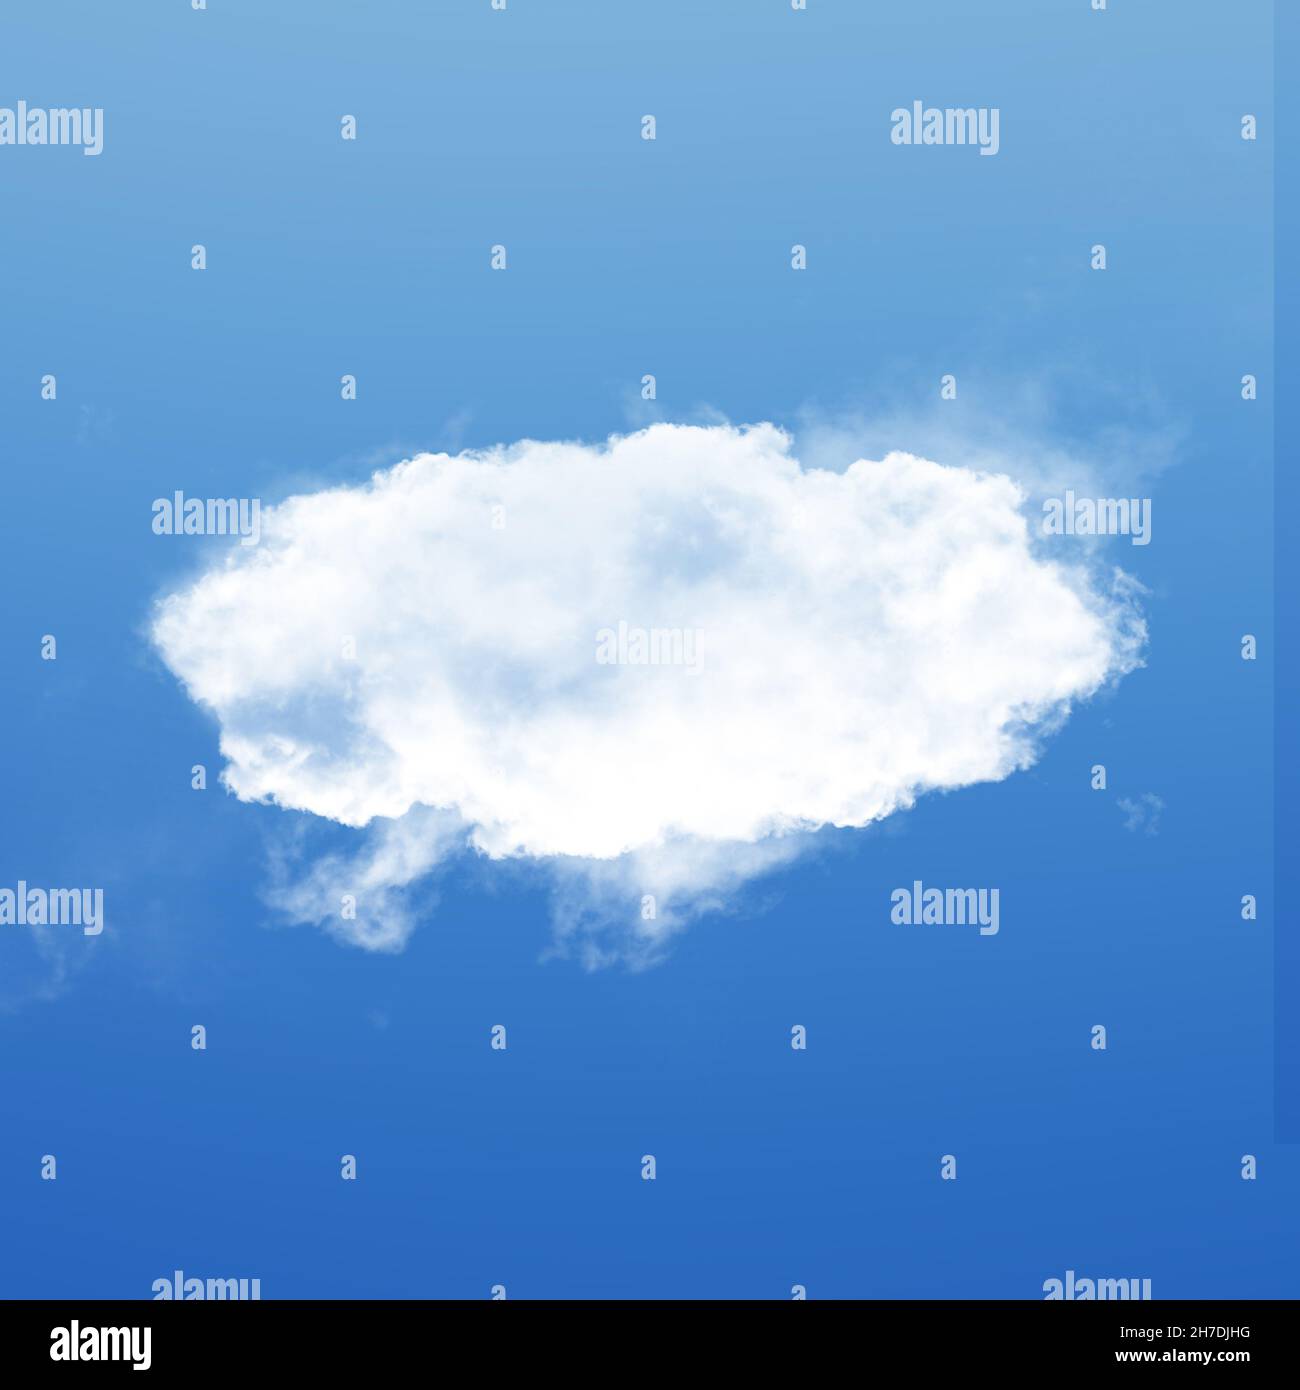 Cloud isolated over blue sky background 3D illustration, realistic cloud shape rendering Stock Photo